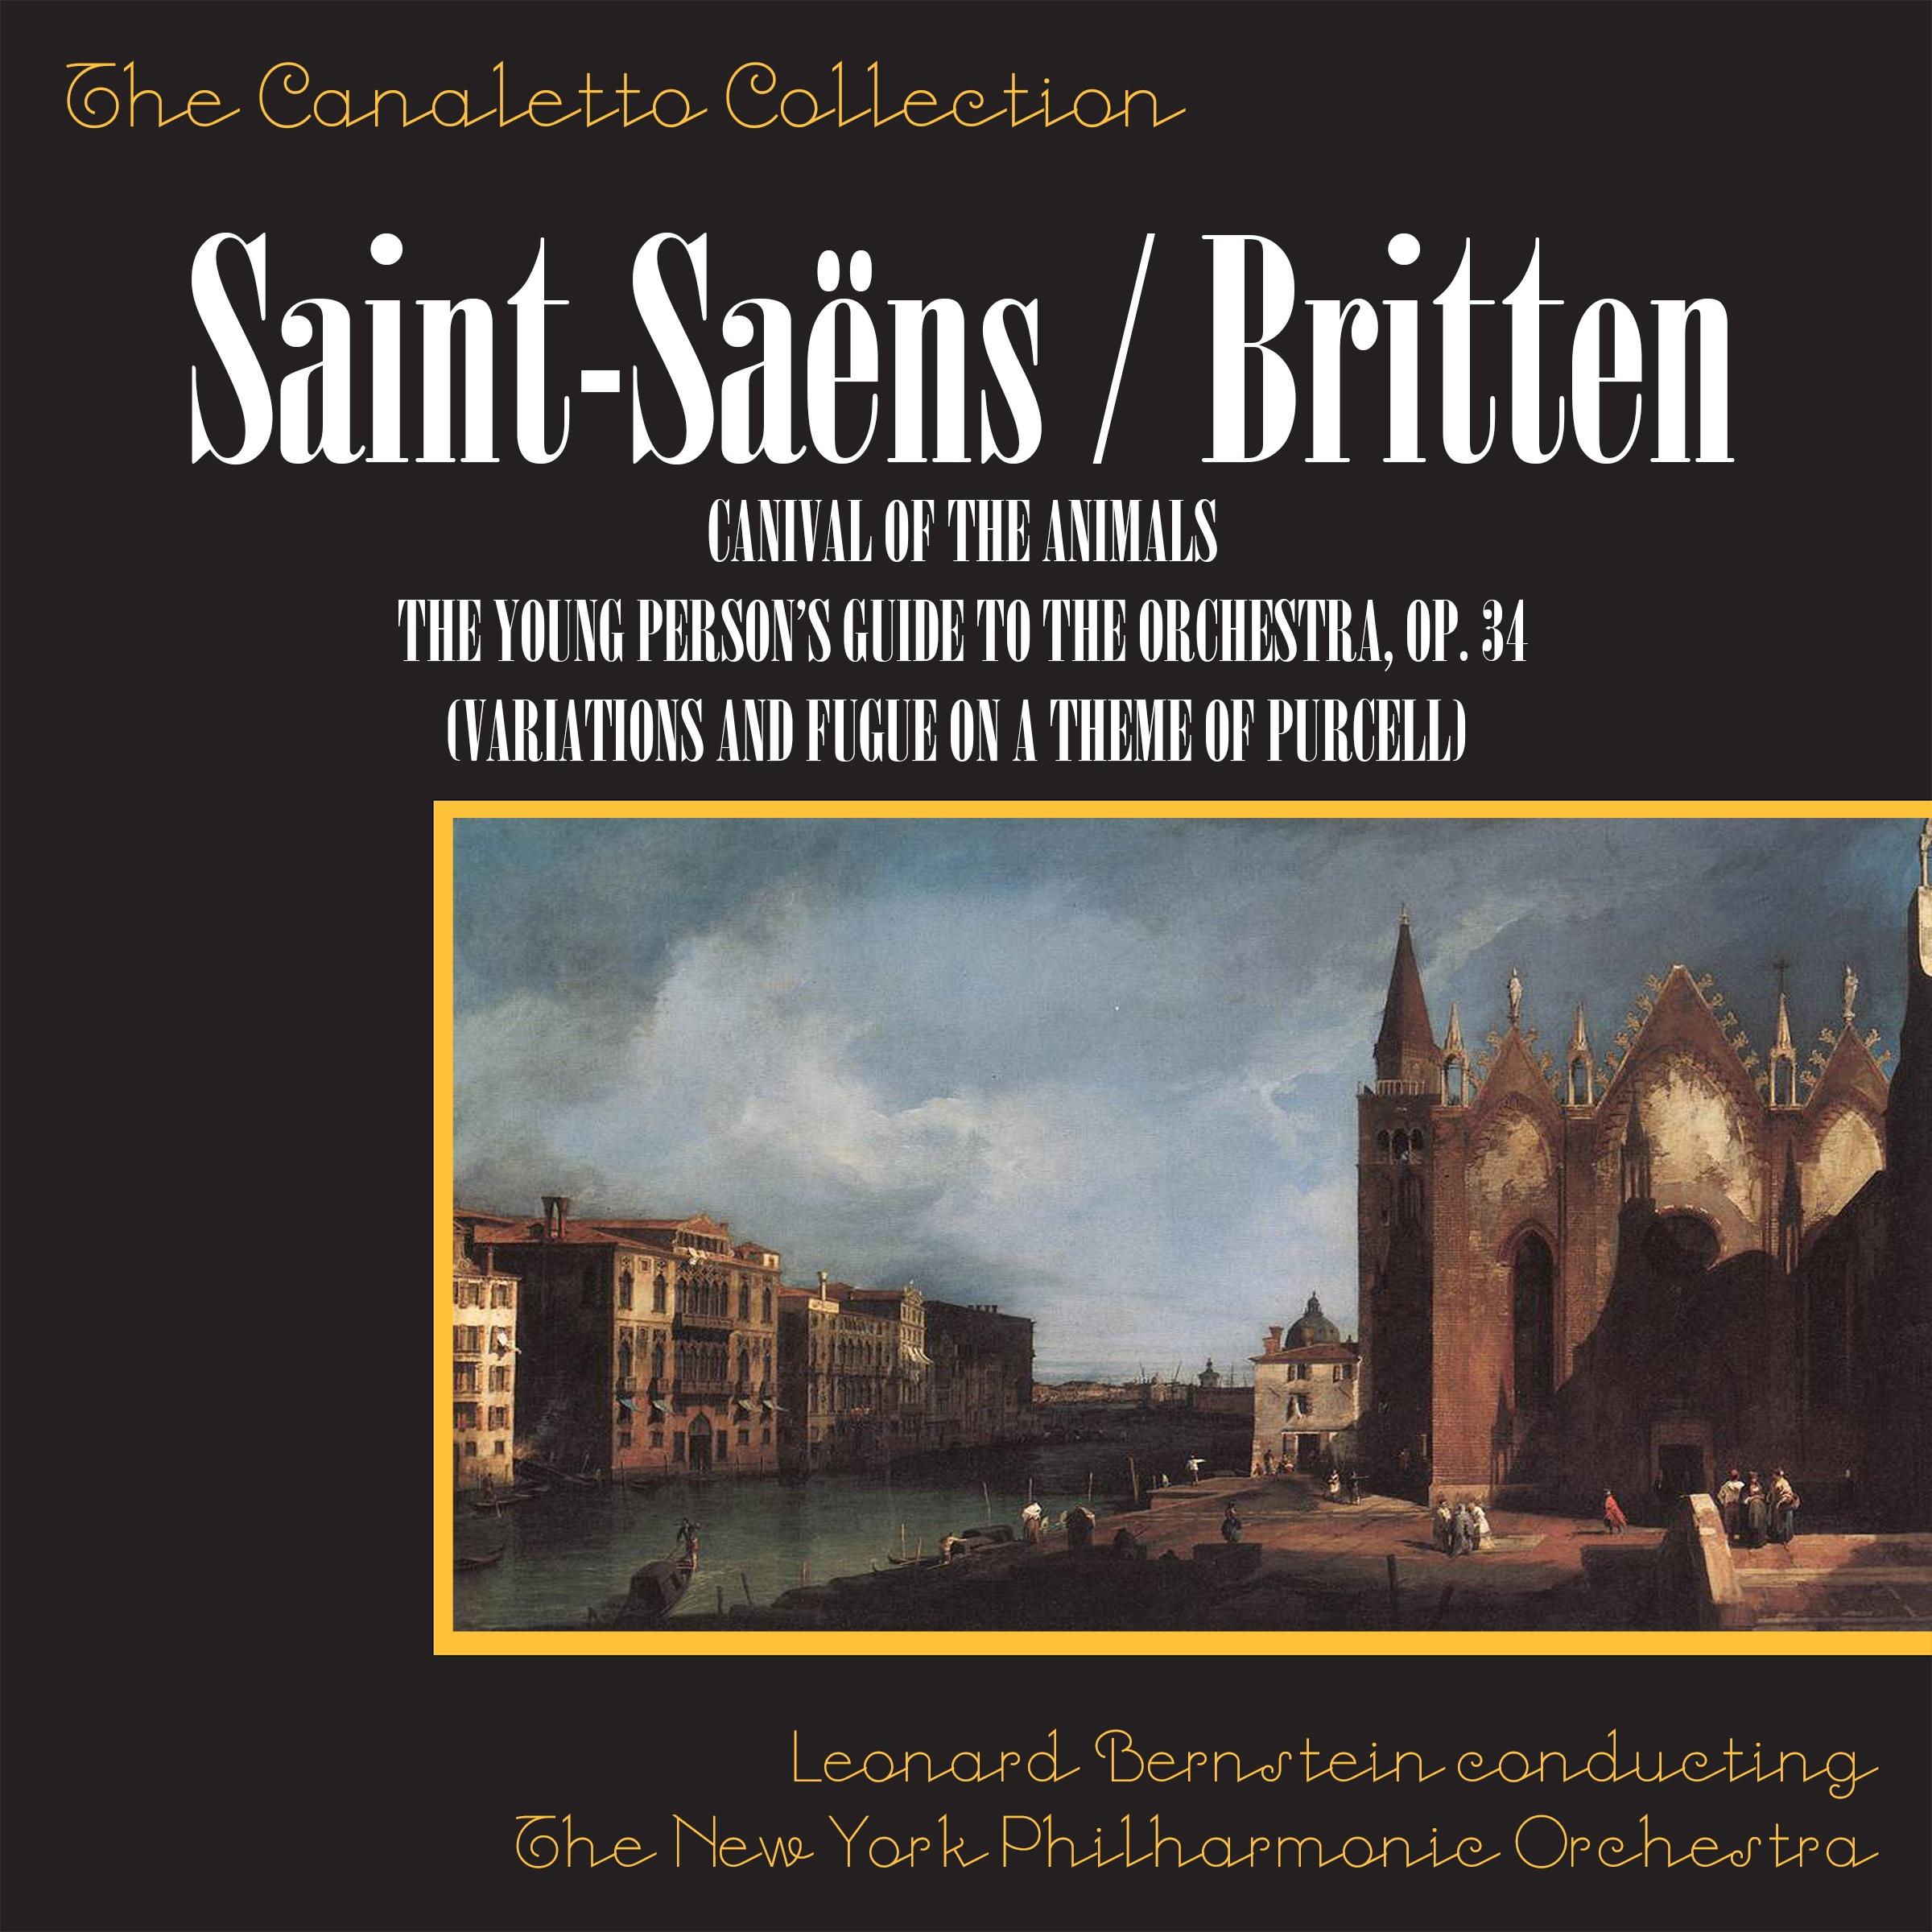 SaintSa ns: Carnival Of The Animals  Britten: The Young Person' s Guide To The Orchestra, Op. 34 Variations And Fugue On A Theme Of Purcell